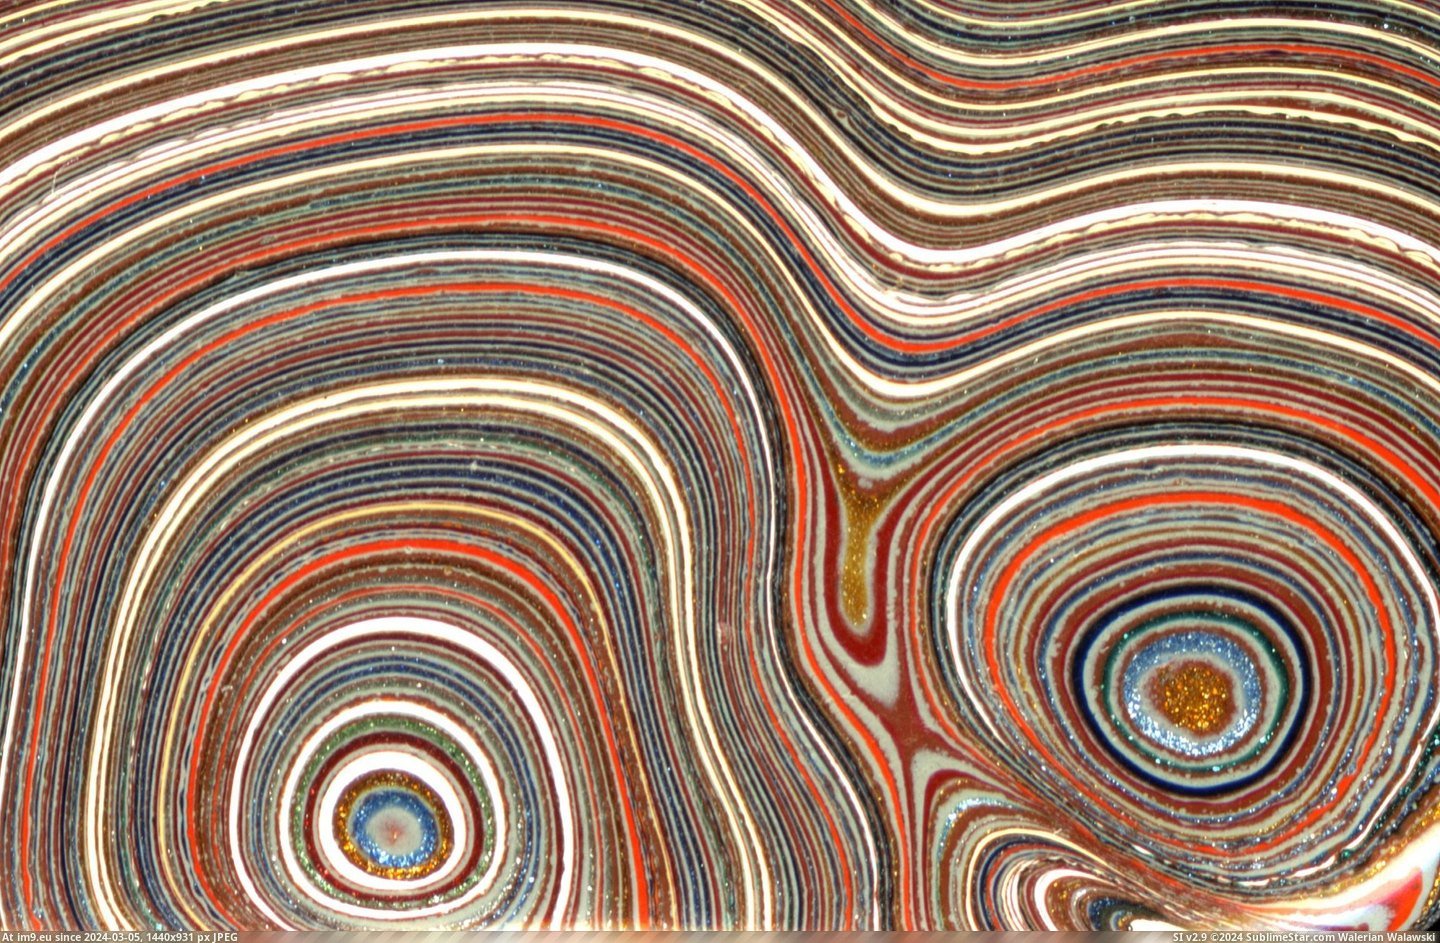 #Paint #Cars #Layers #Thousands #Agate #Enamel #Fordite #Baked #Detroit #Repeatedly [Pics] This is Fordite, or ''Detroit agate'', thousands of layers of repeatedly baked enamel paint from the days when cars were  Pic. (Bild von album My r/PICS favs))